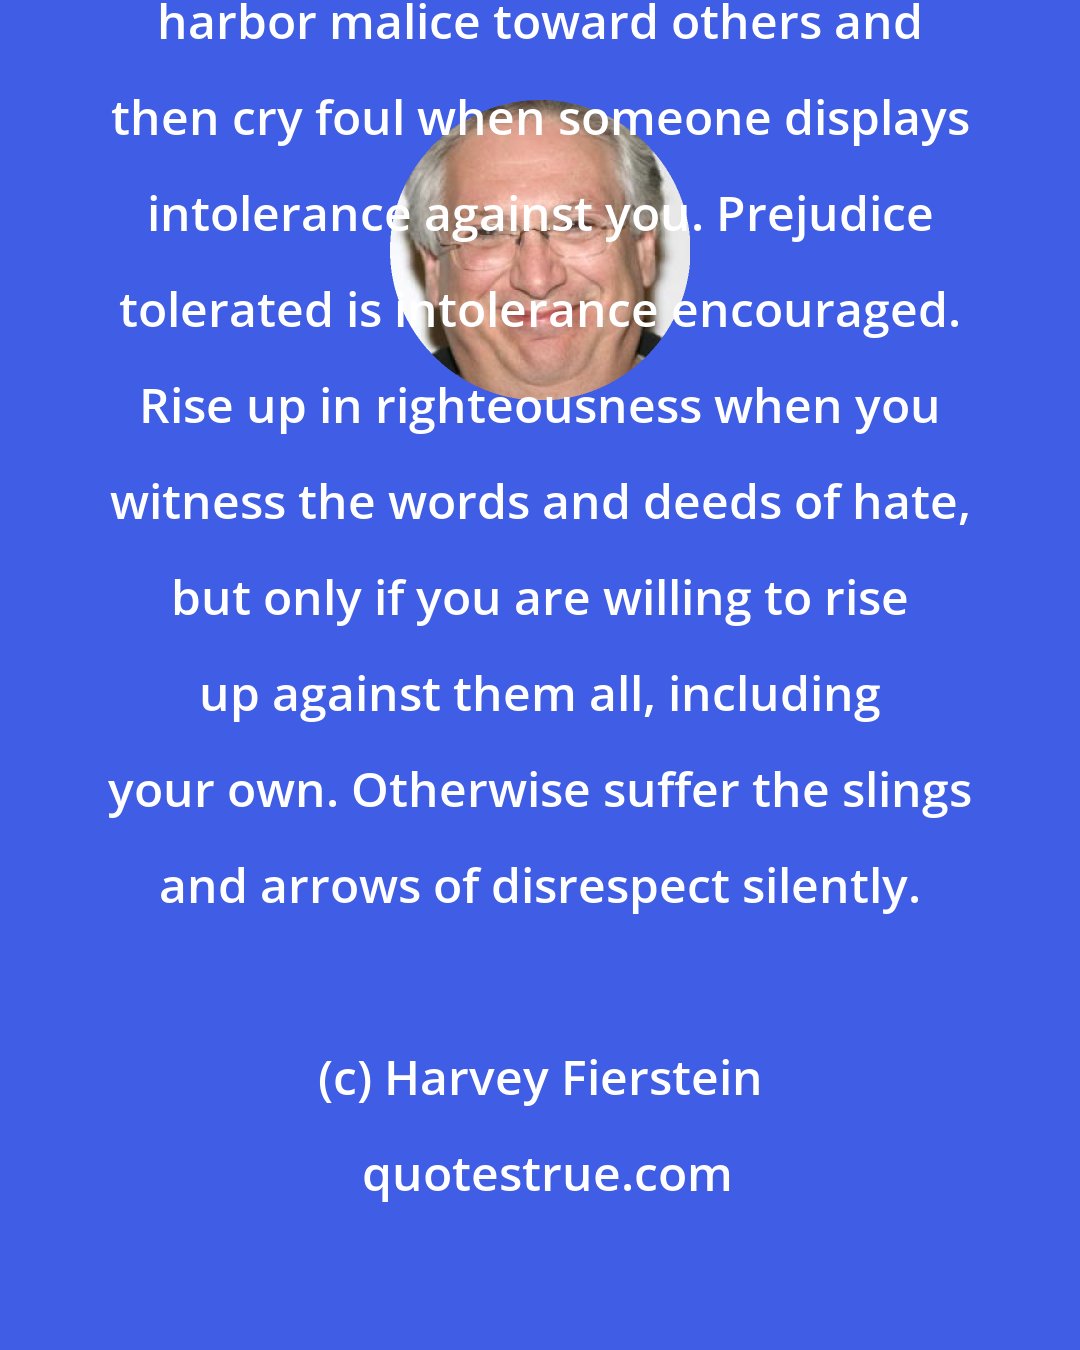 Harvey Fierstein: The real point is that you cannot harbor malice toward others and then cry foul when someone displays intolerance against you. Prejudice tolerated is intolerance encouraged. Rise up in righteousness when you witness the words and deeds of hate, but only if you are willing to rise up against them all, including your own. Otherwise suffer the slings and arrows of disrespect silently.